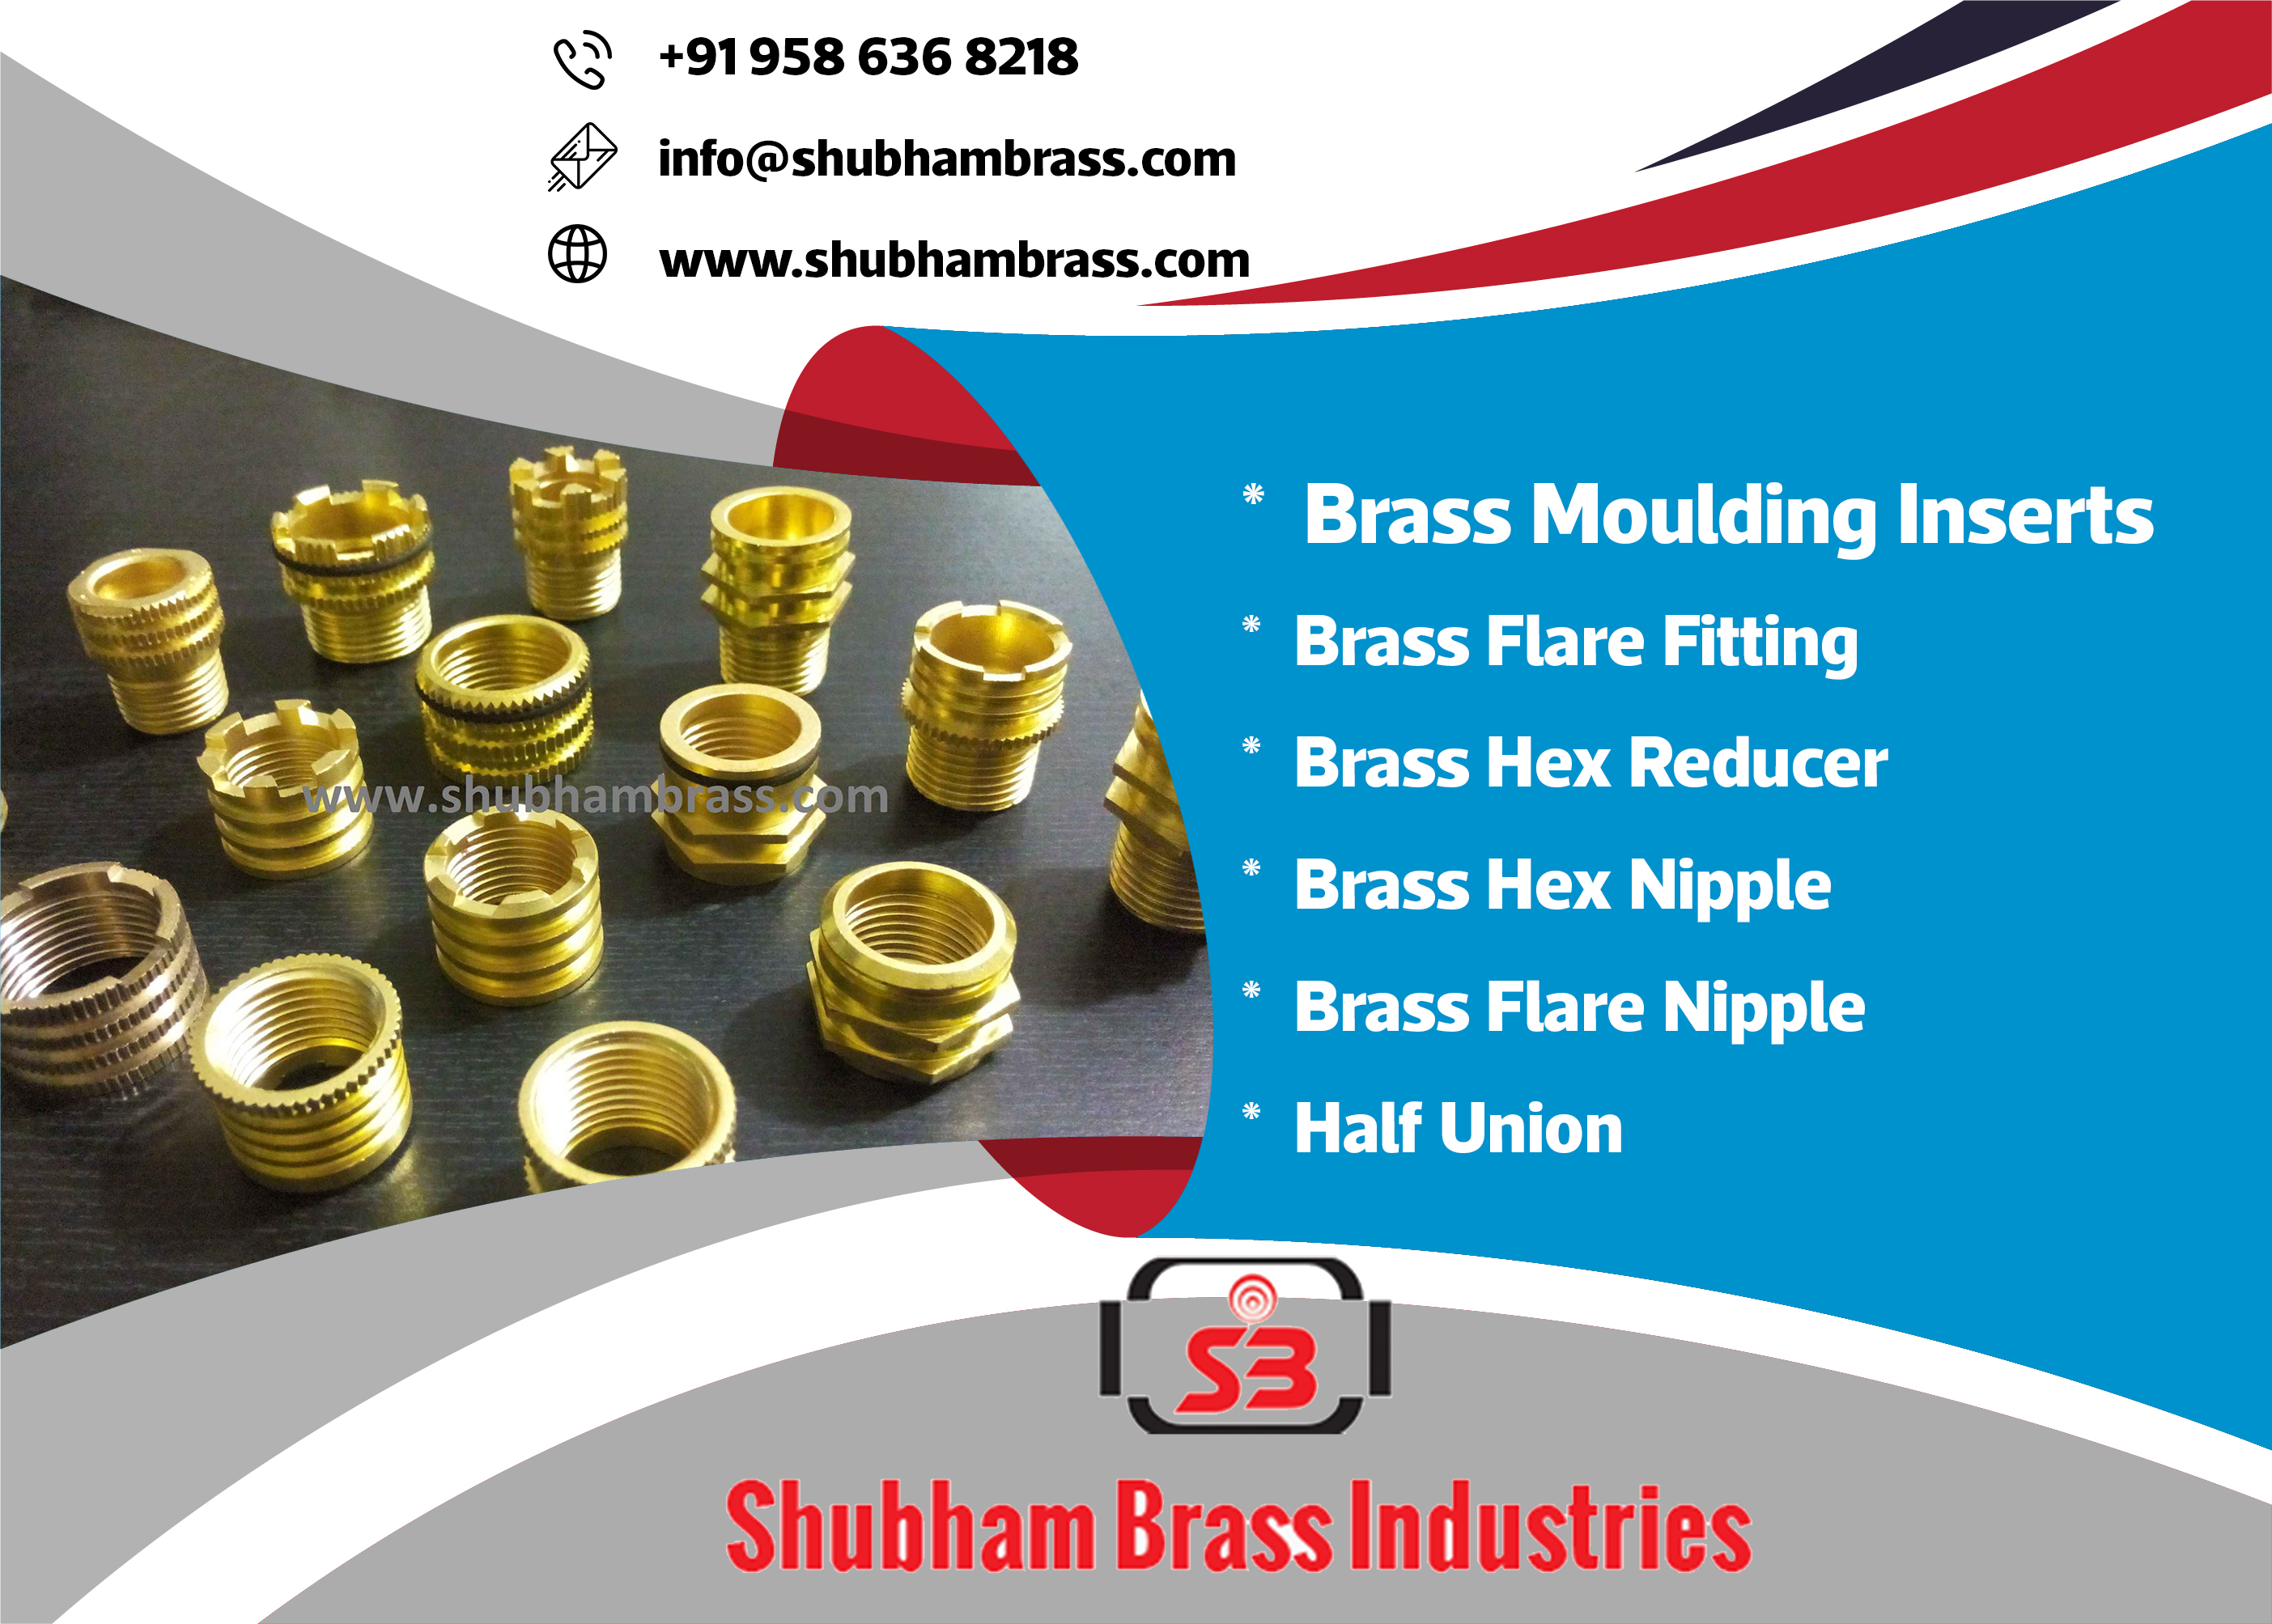 Manufacturer of brass products, Shubham Brass Inserts